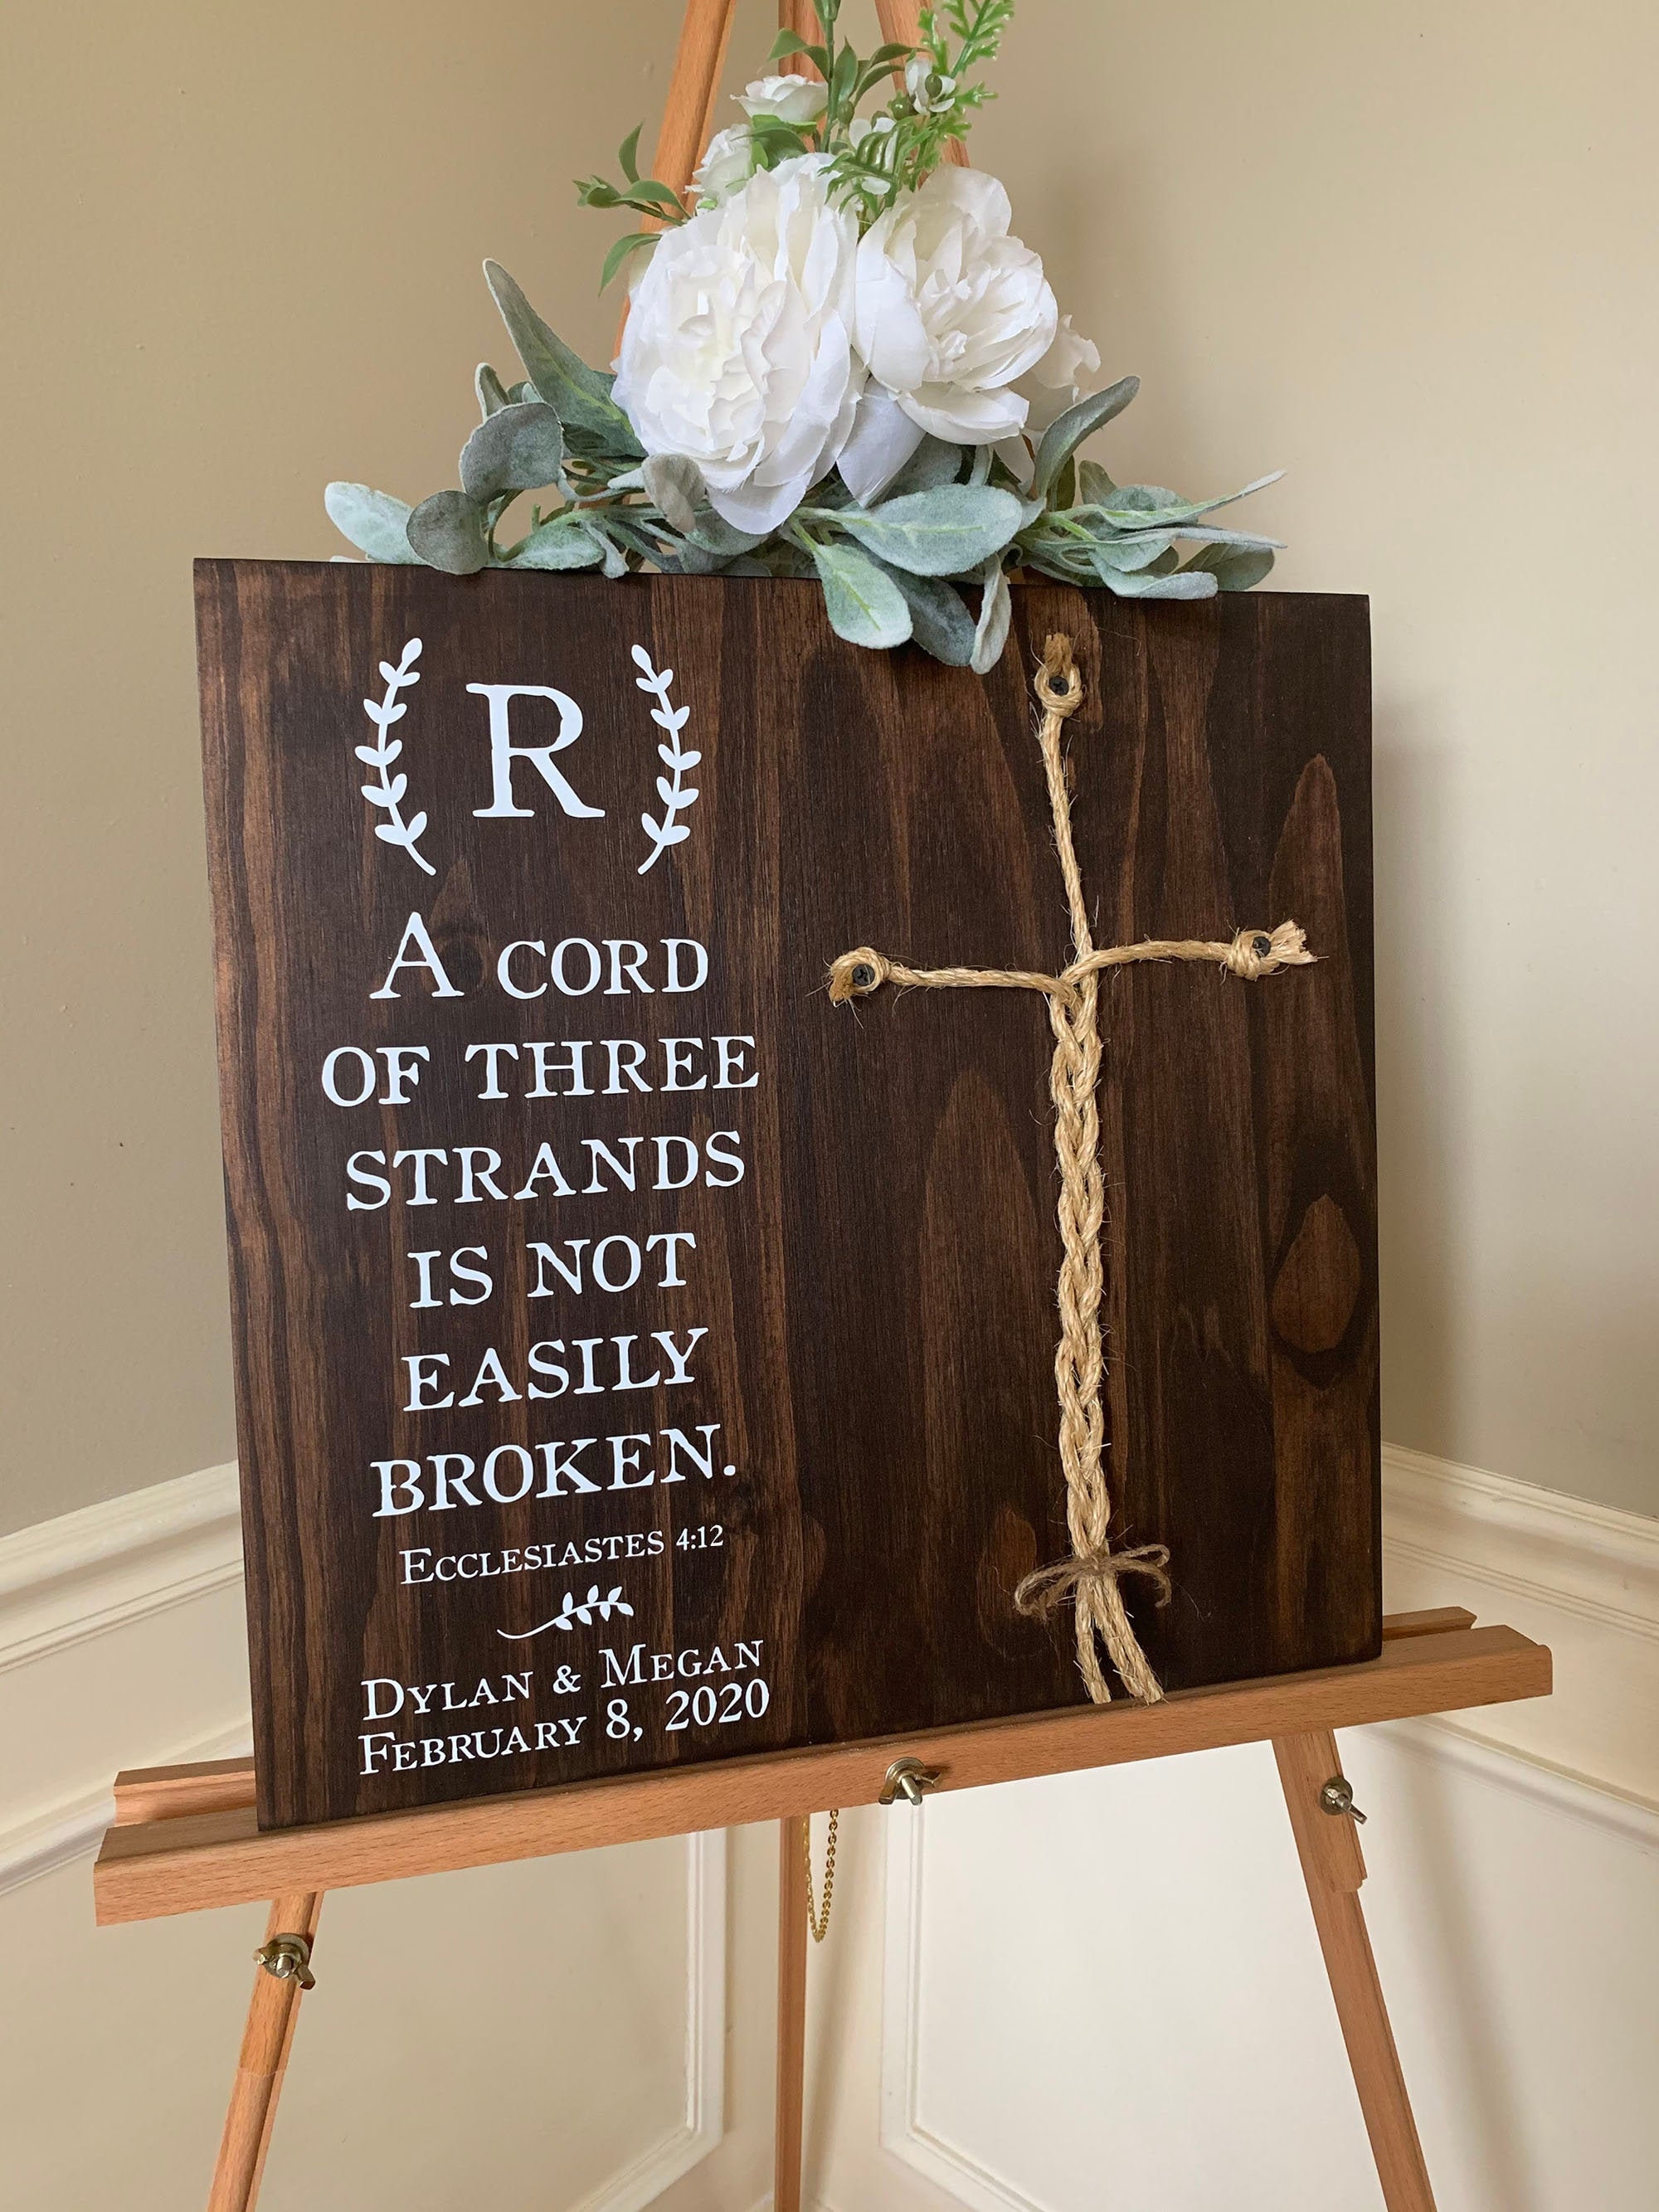 cheapest to sell Religious wedding decor. A cord of three